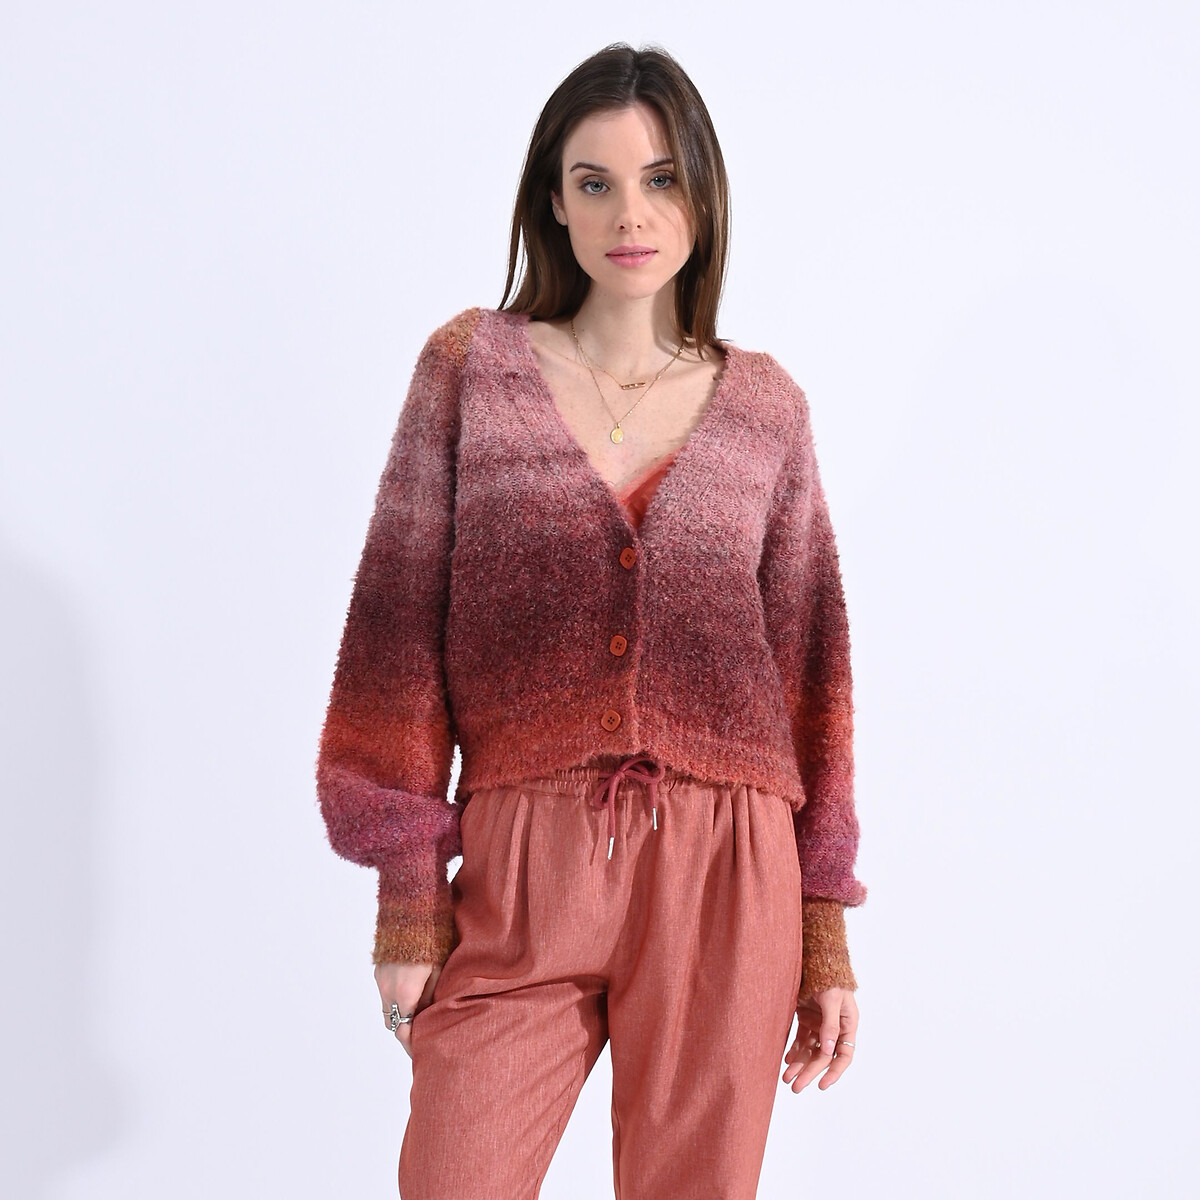 Cropped Marl Knit Cardigan with Puff Sleeves